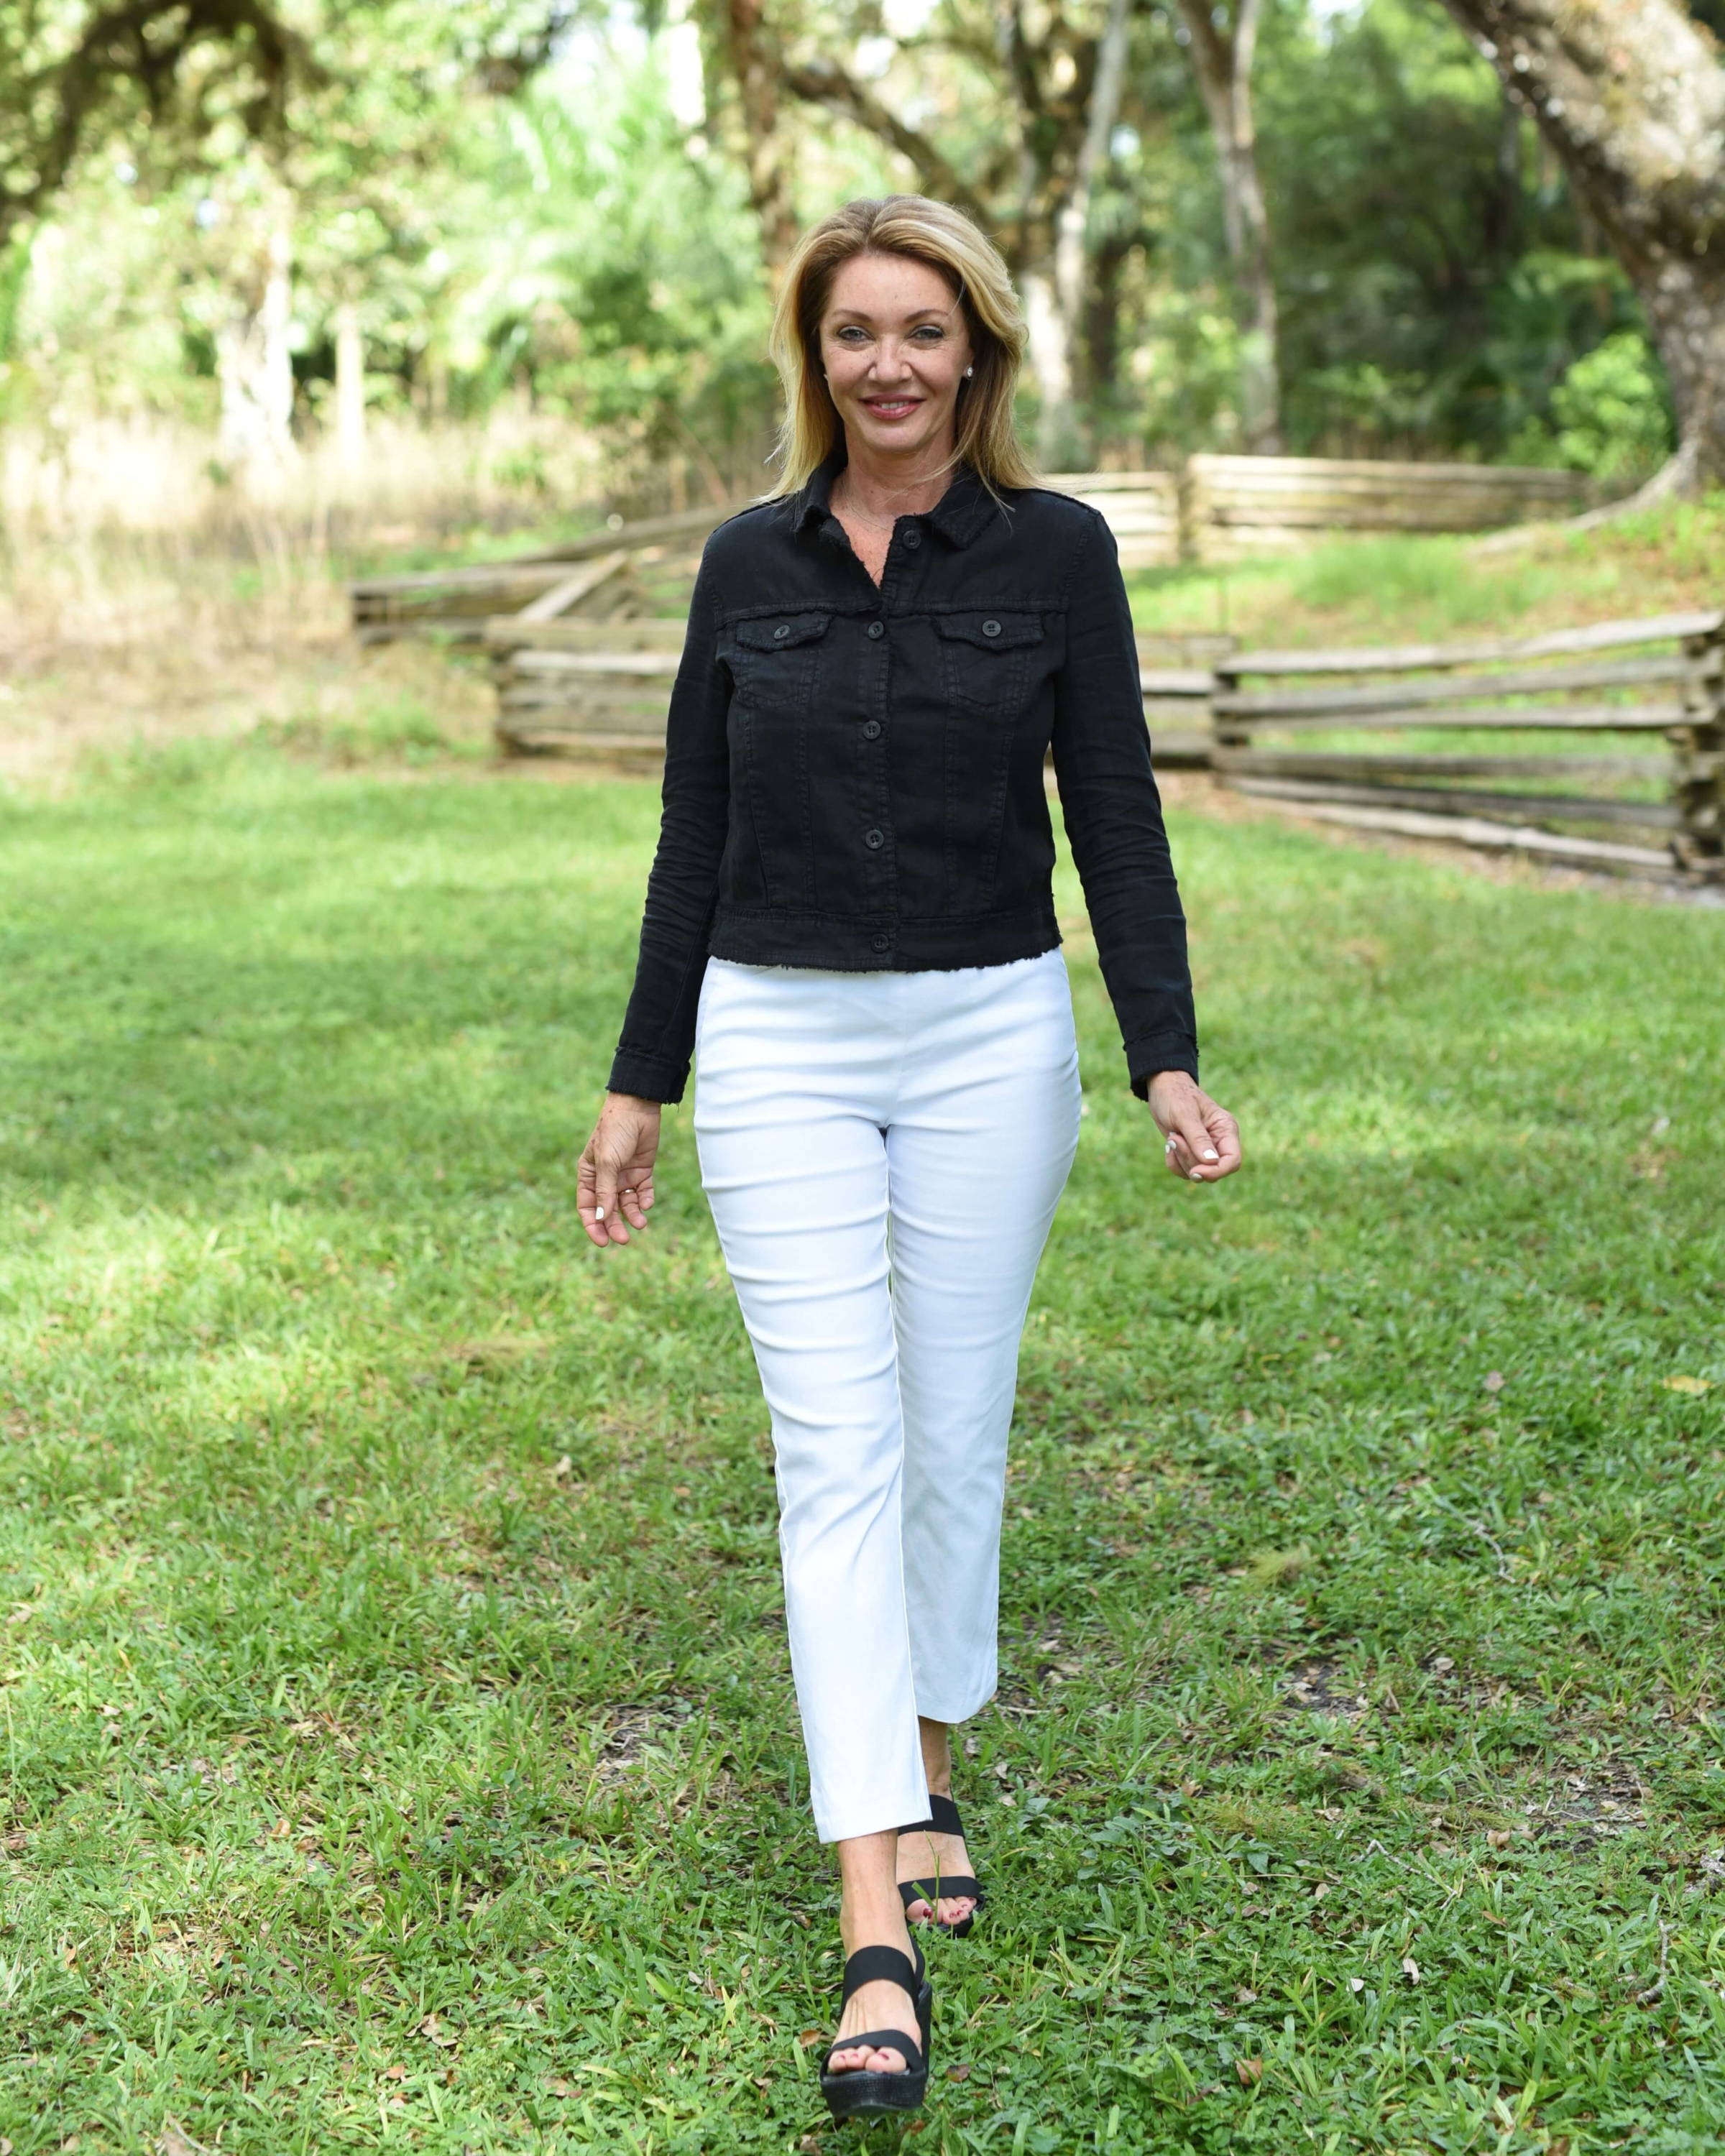 A blonde woman in a black jacket and white pants stands in a field with a tree in the background. 